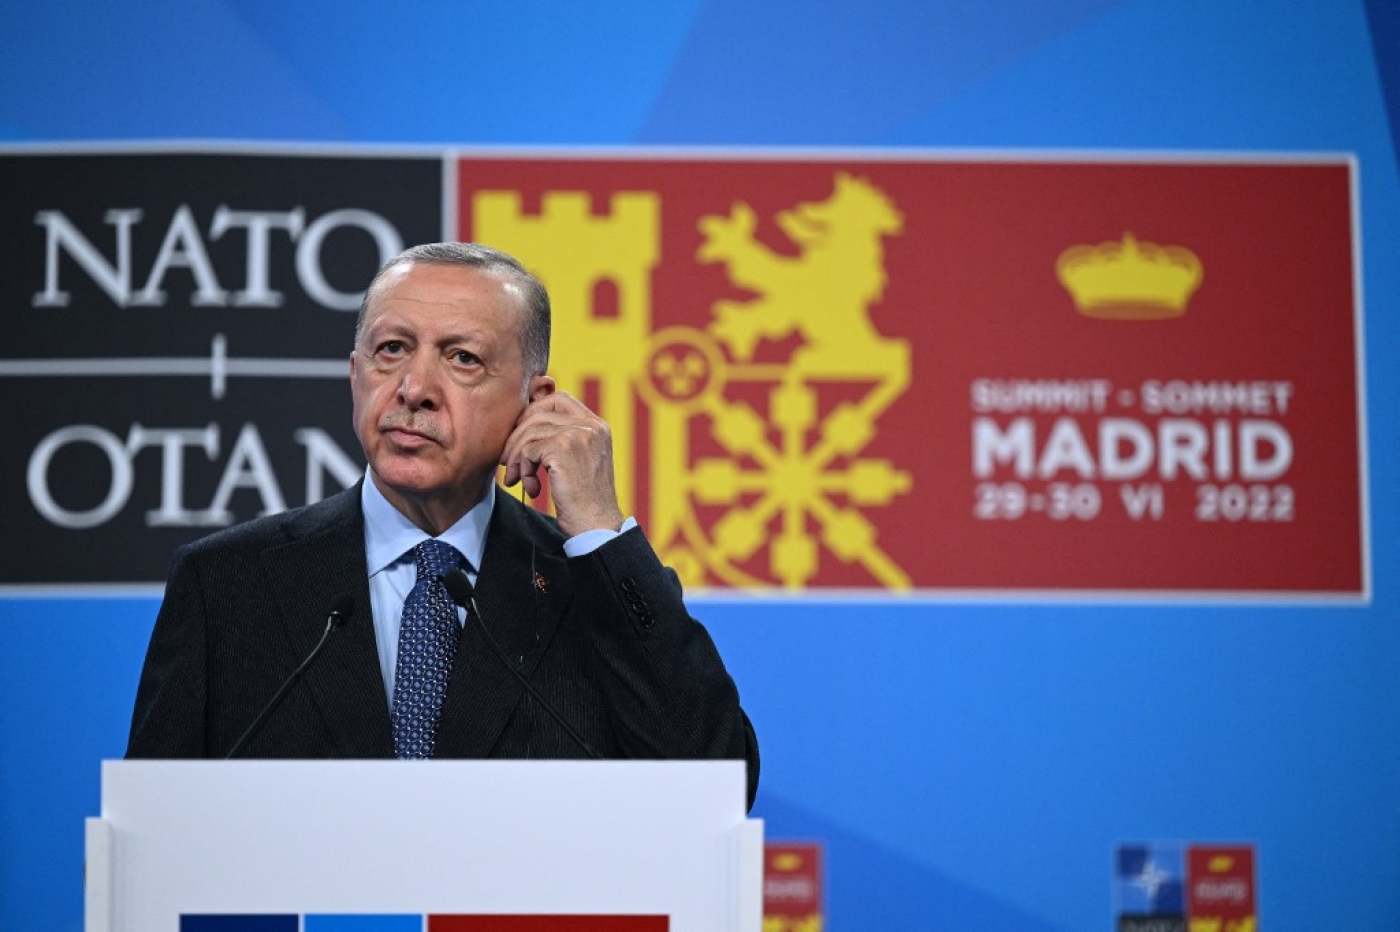 Turkey's President Recep Tayyip Erdogan addresses media representatives during a press conference at the NATO summit at the Ifema congress centre in Madrid, on June 30, 2022. (AFP)